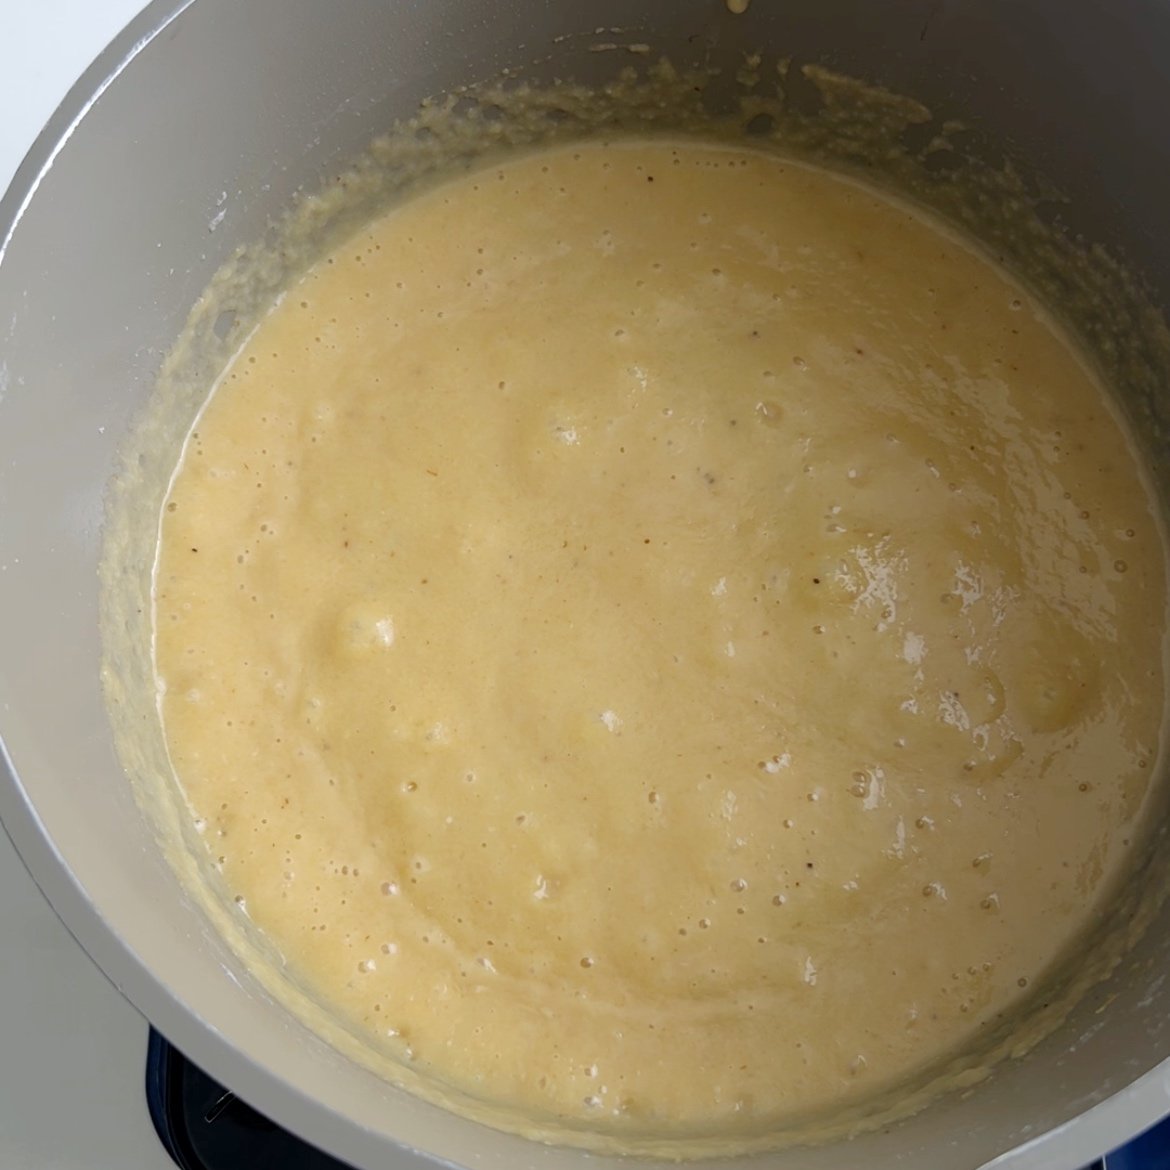 Plantain porridge in pot with visible bubbles from boiling